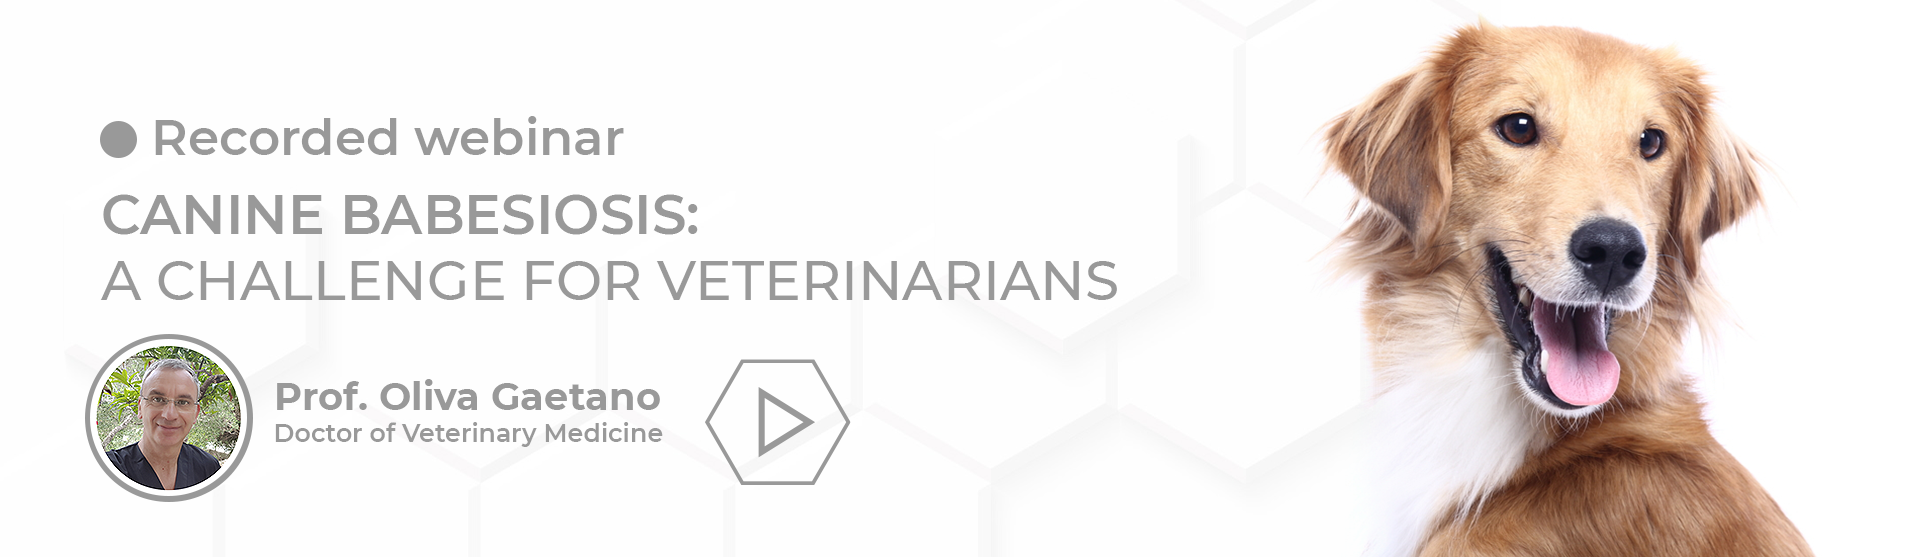 CANINE BABESIOSIS: A CHALLENGE FOR VETERINARIANS